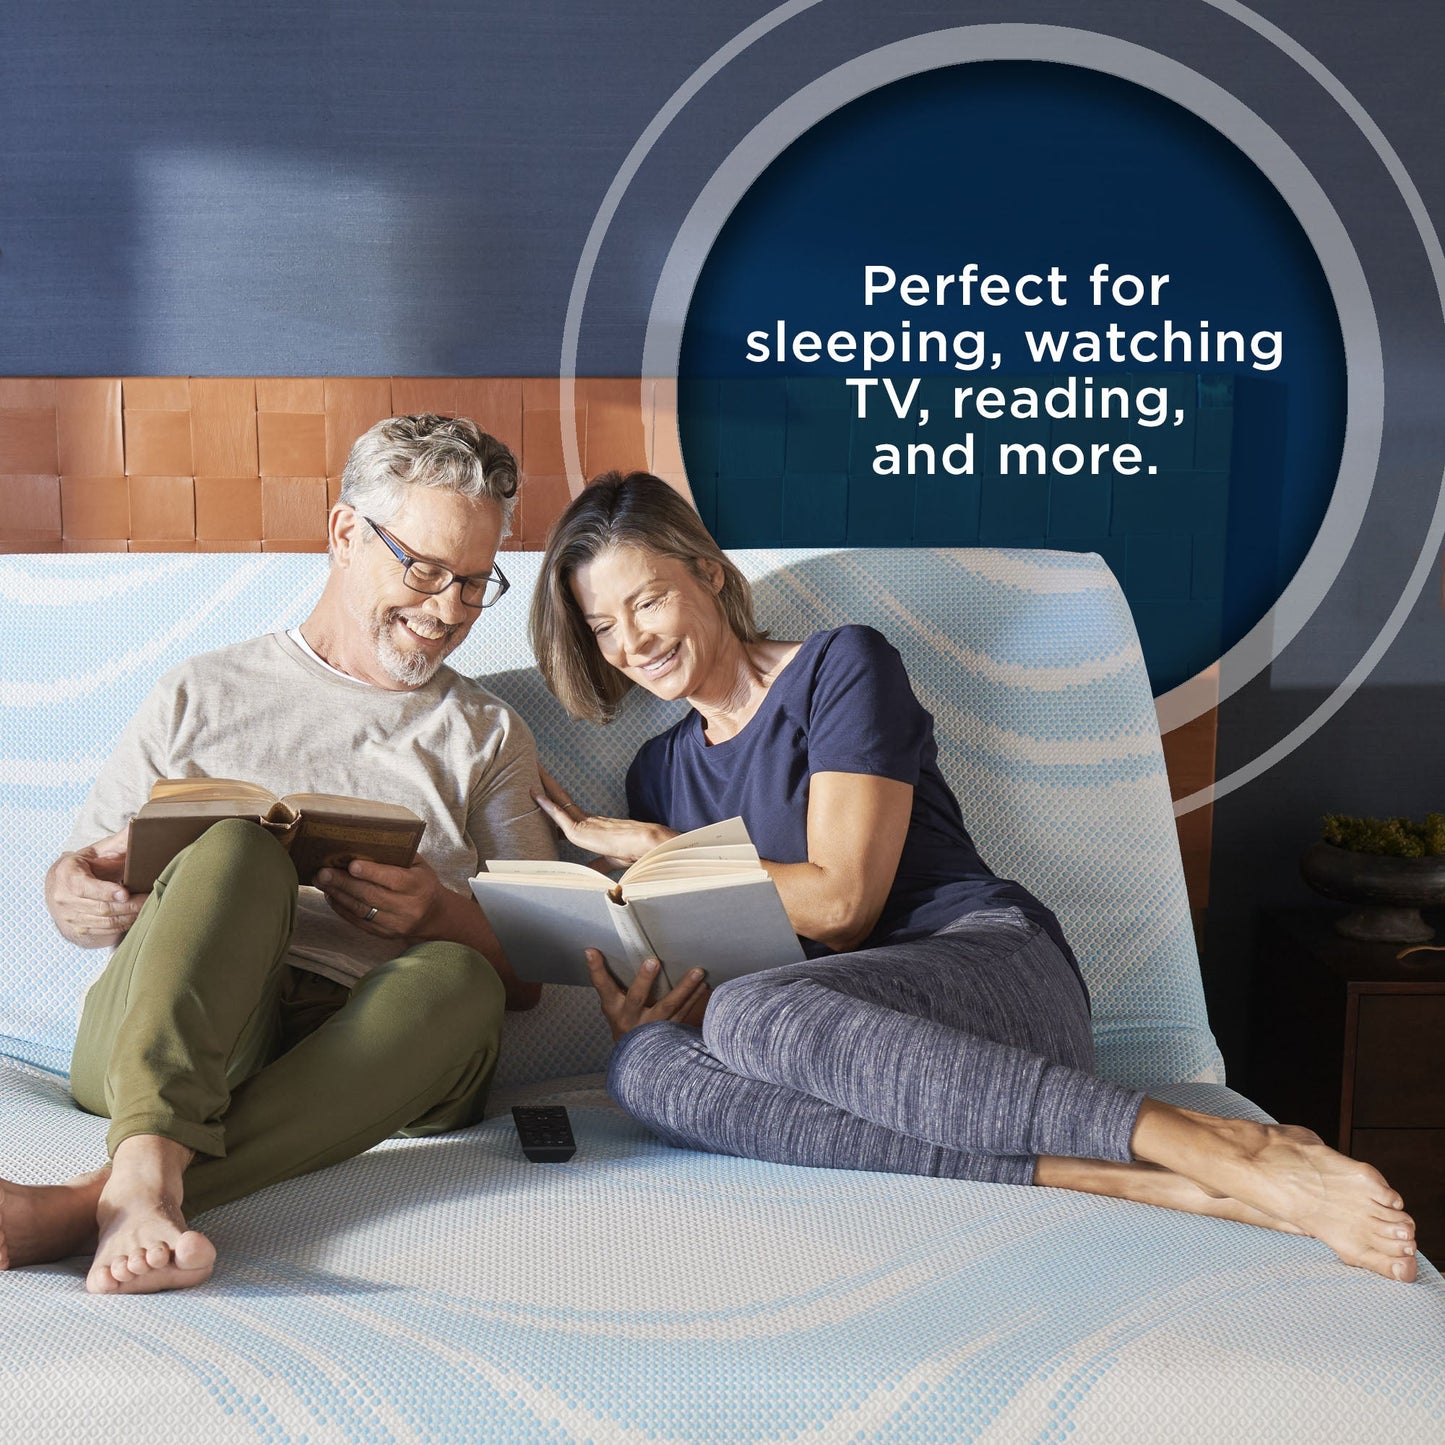 Tempur-Pedic Ergo Smart 3.0 Adjustable Base, perfect for sleeping, watching TV, reading, and more.